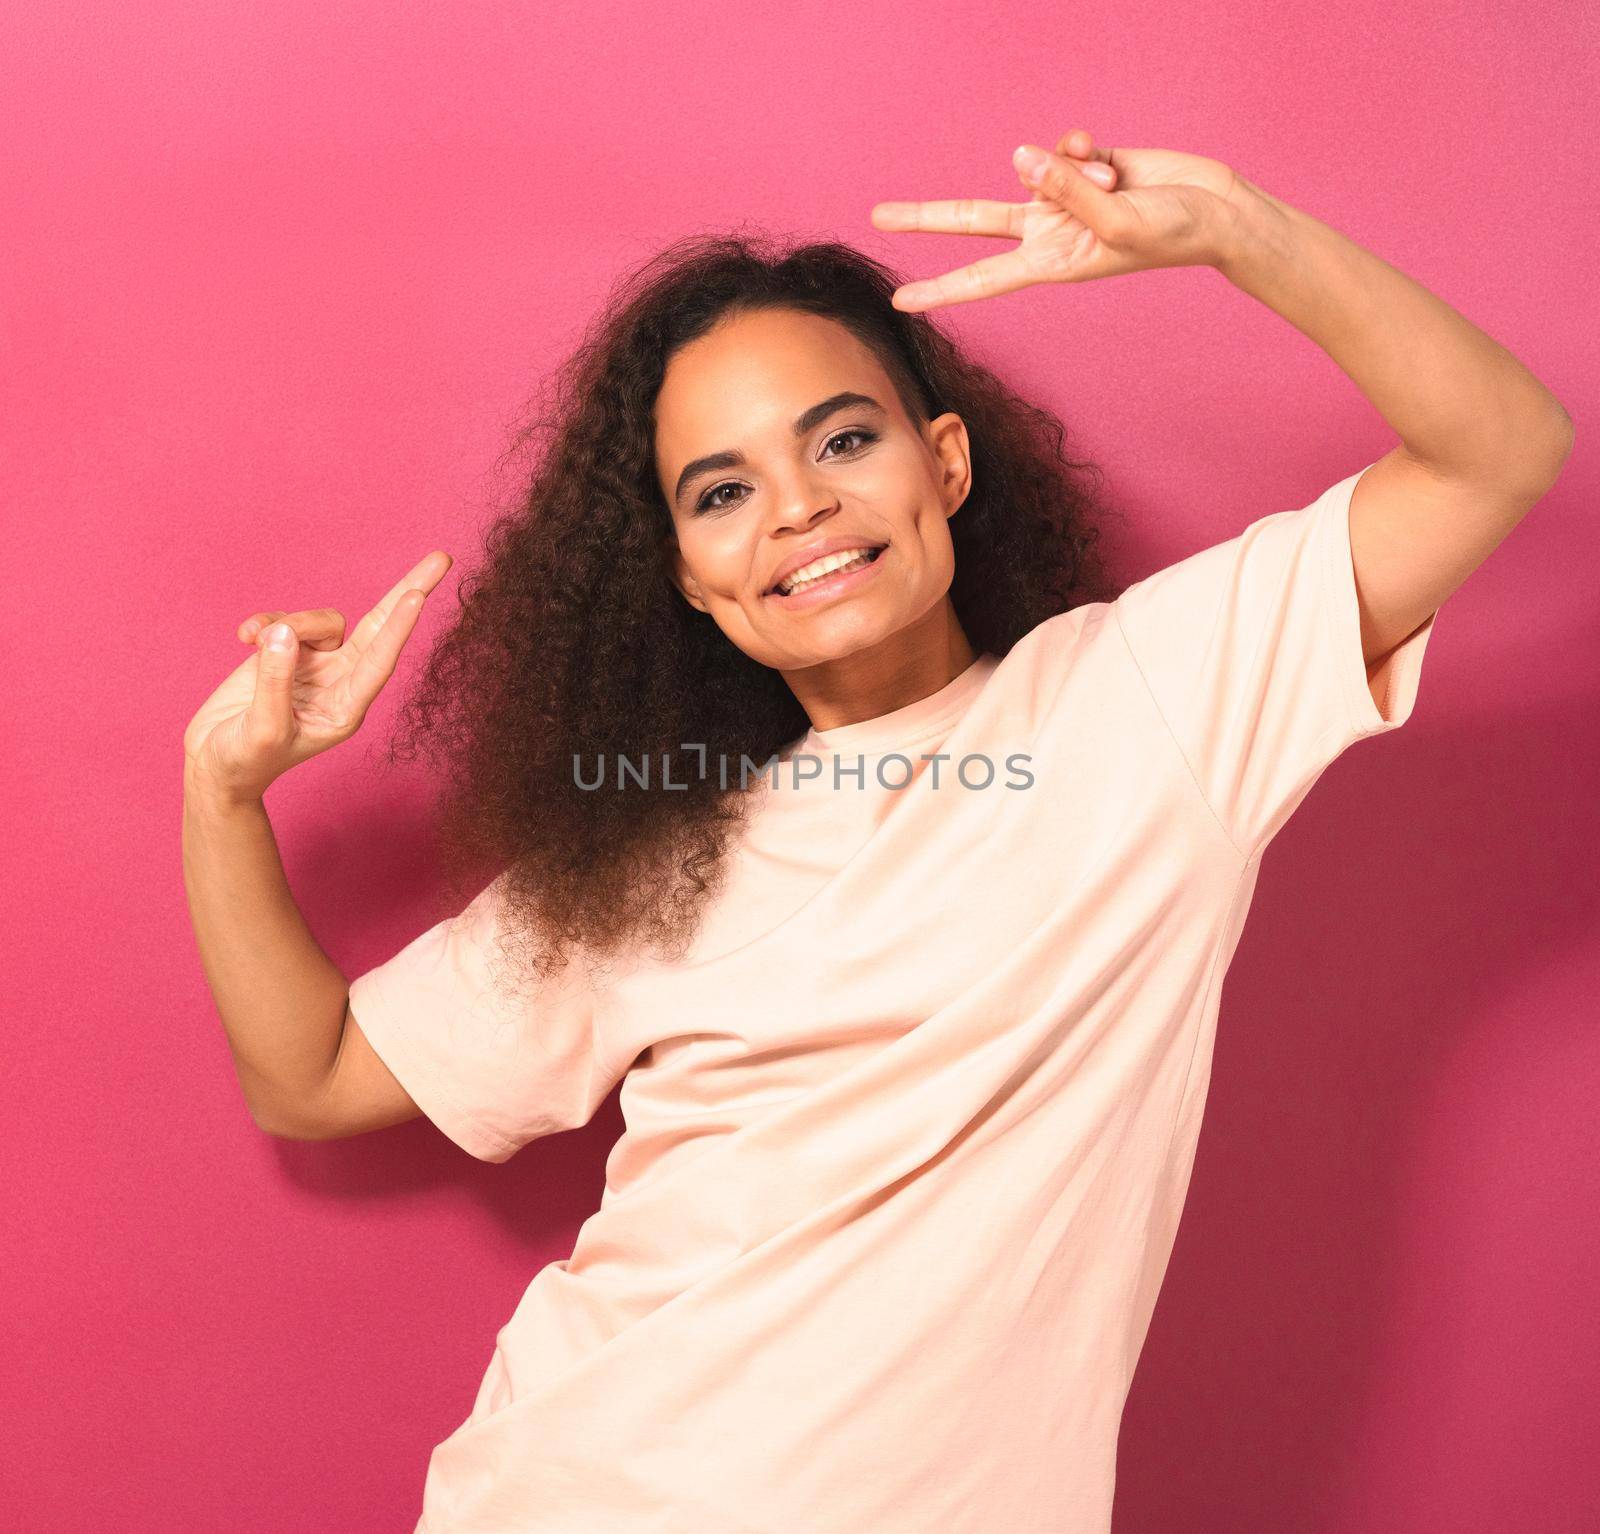 Young African American girl with Afro hair dancing gesturing peace with hands lifted up looking positively at camera wearing peachy t-shirt isolated on pink background. Beauty concept. Square footage by LipikStockMedia